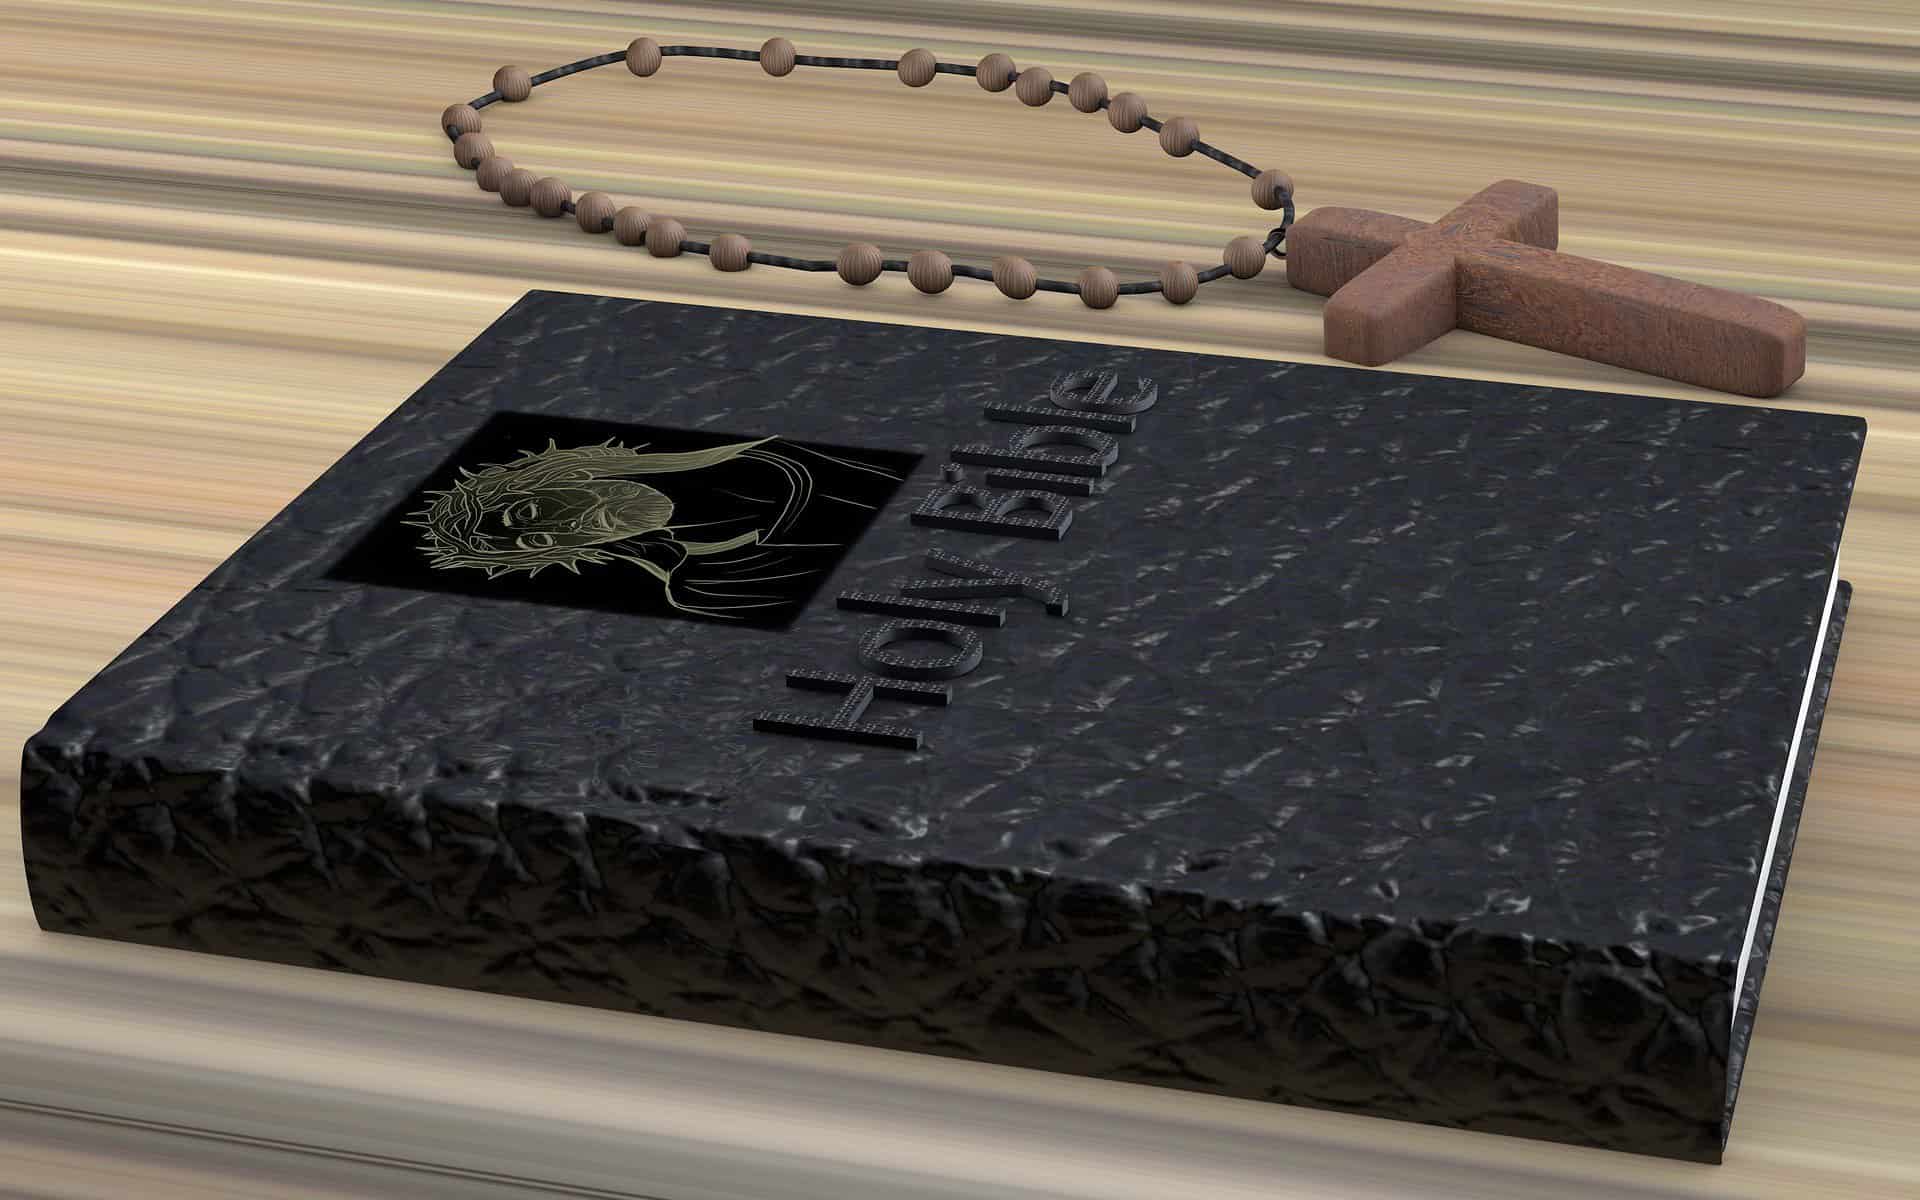 A black bible is shown on a table next to a wooden rosary with a large cross.